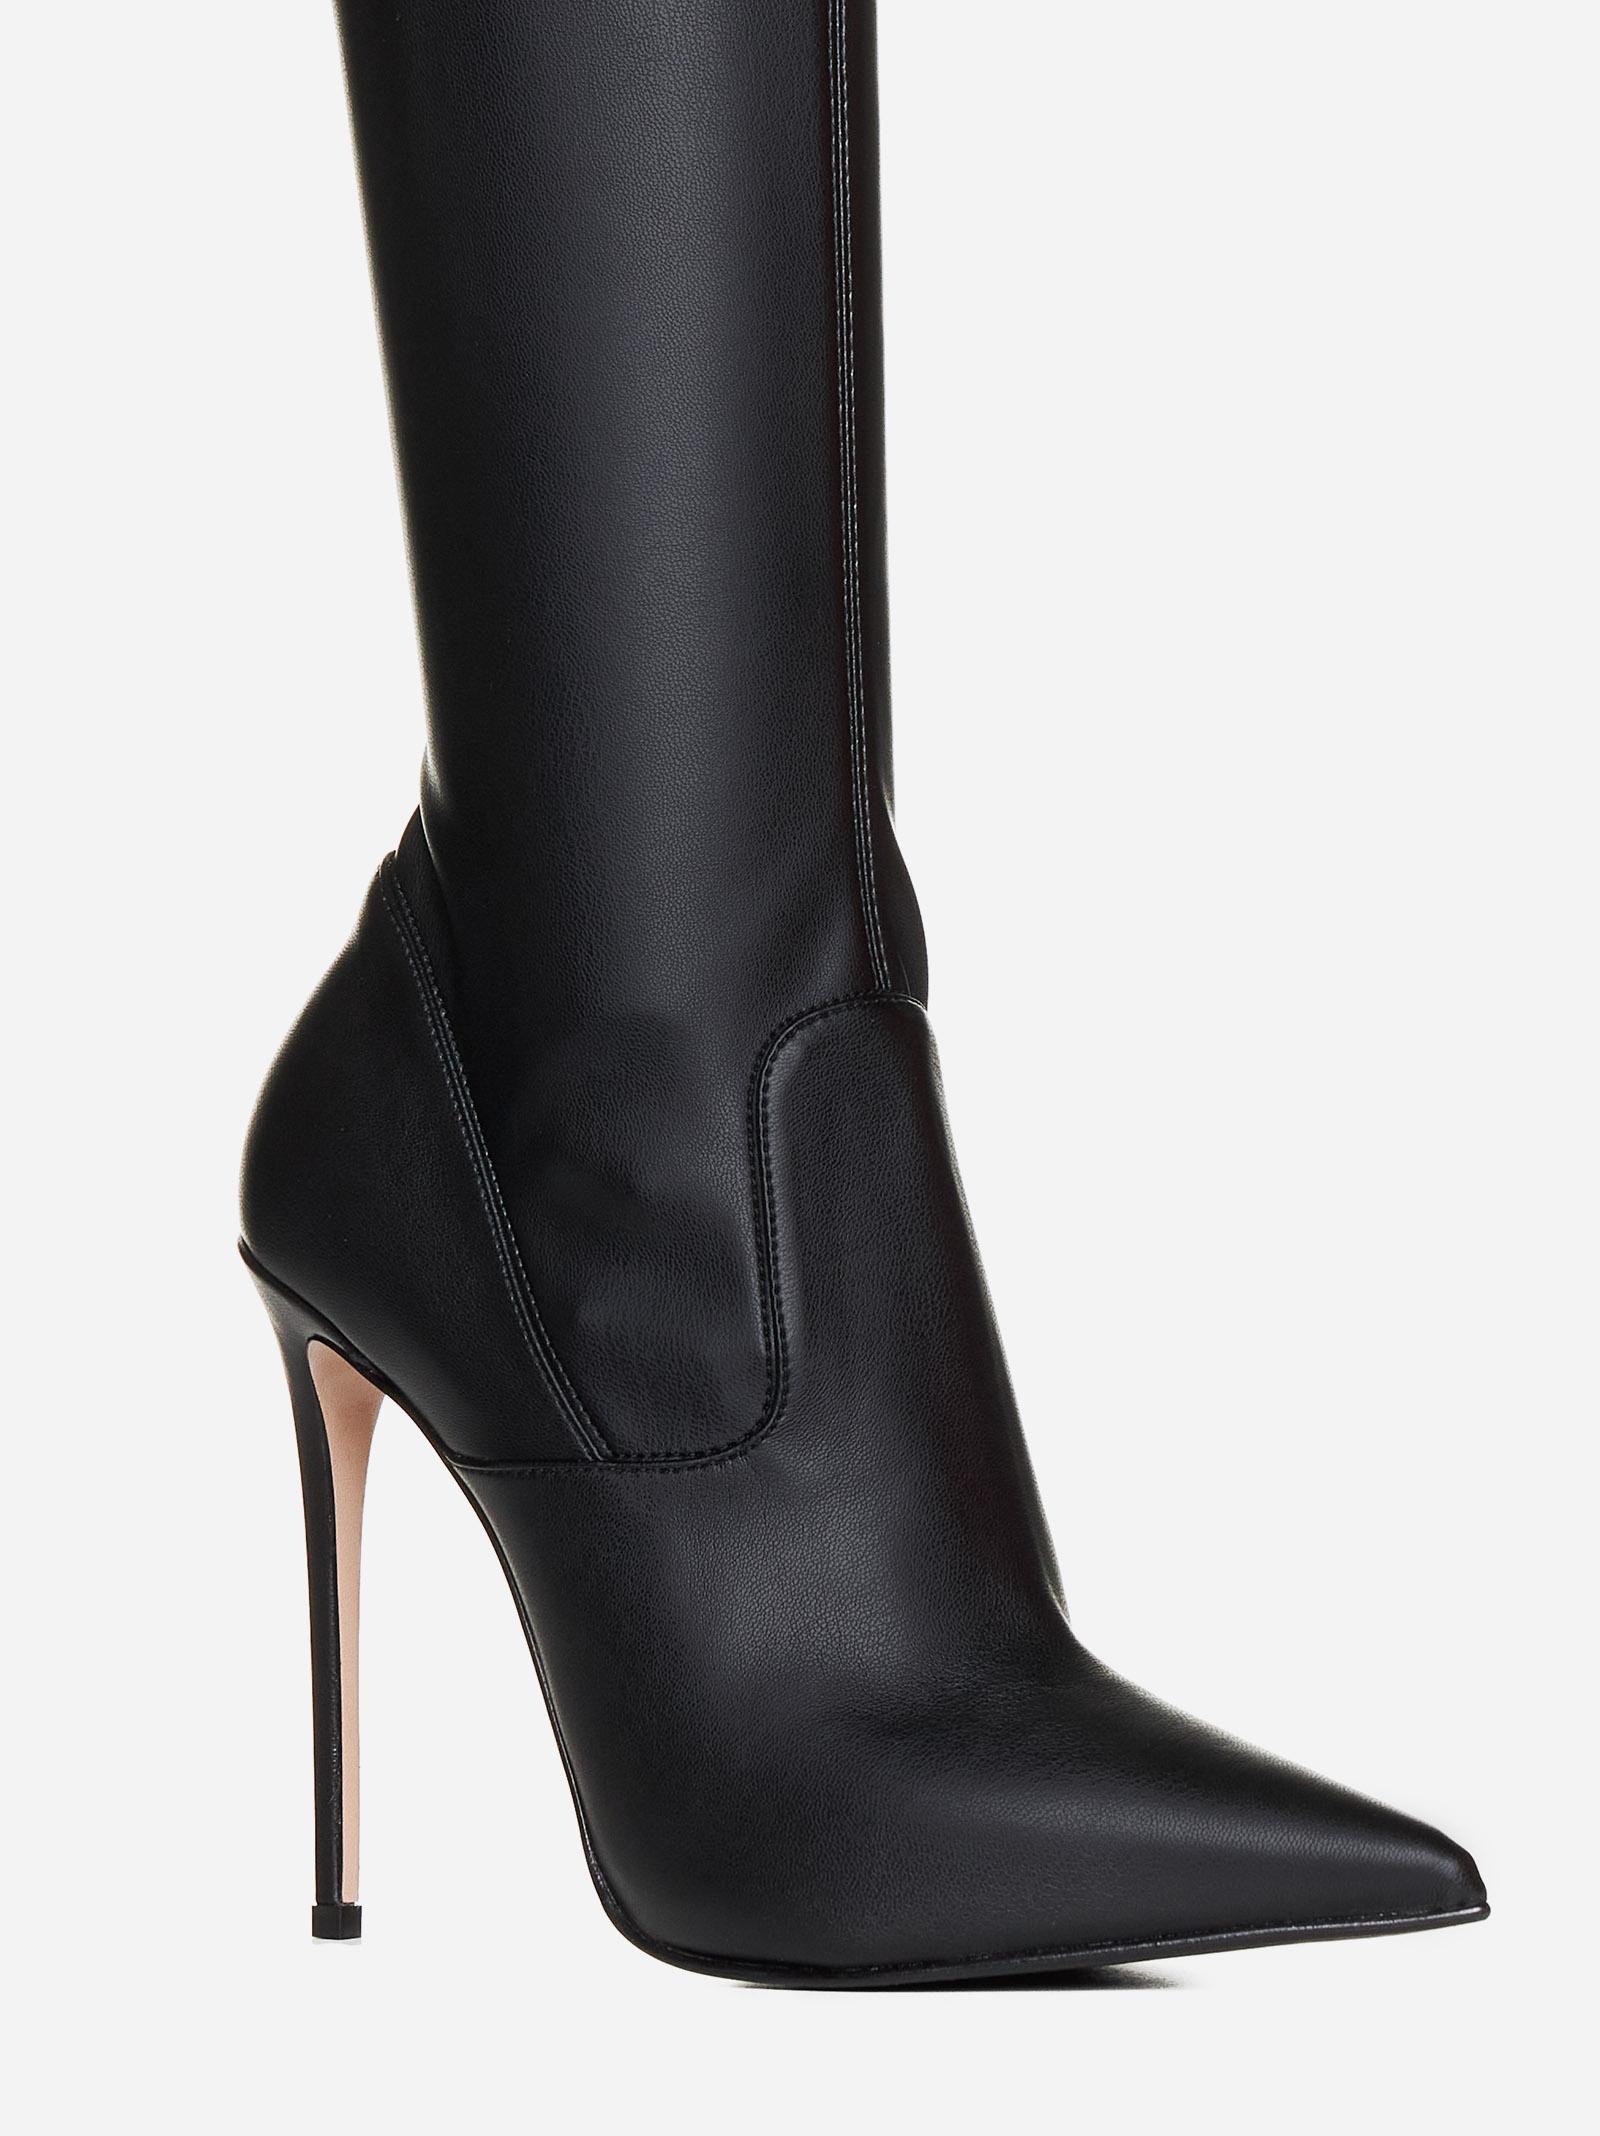 Le Silla Boots in Black | Lyst